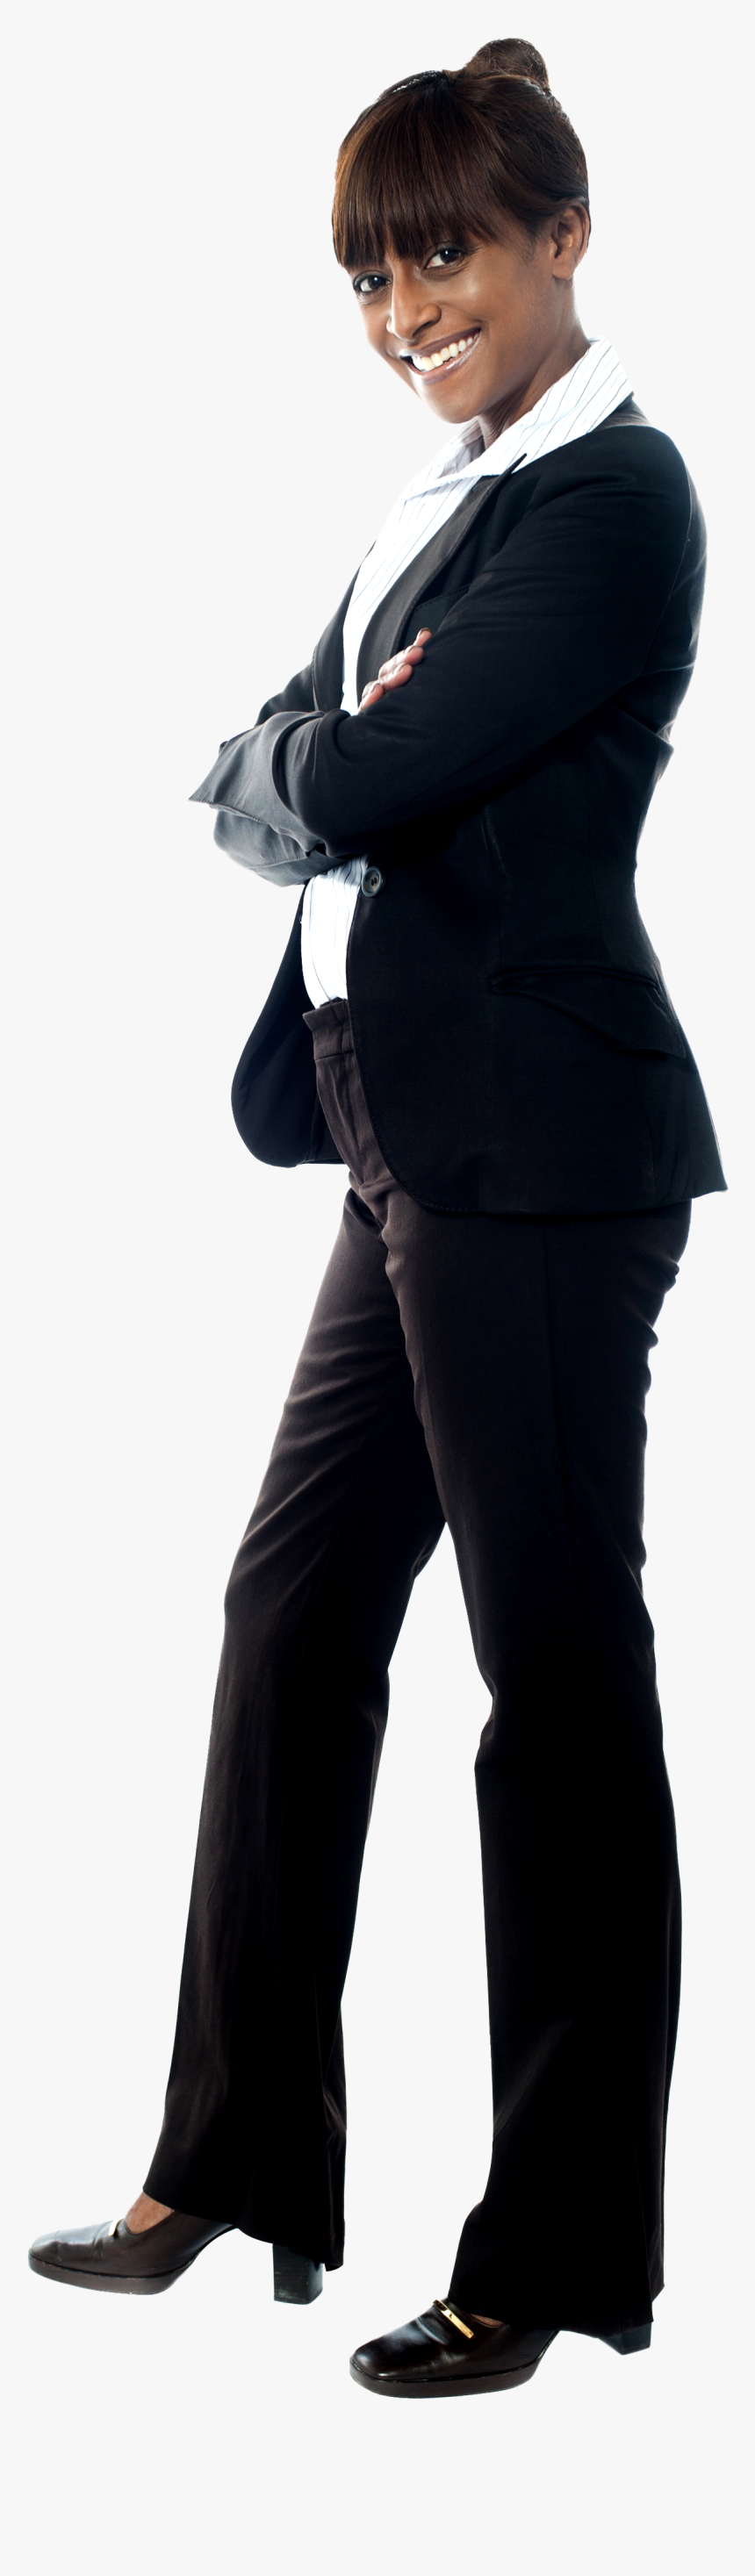 Woman Suit Png - Women In Business Png, Transparent Png, Free Download